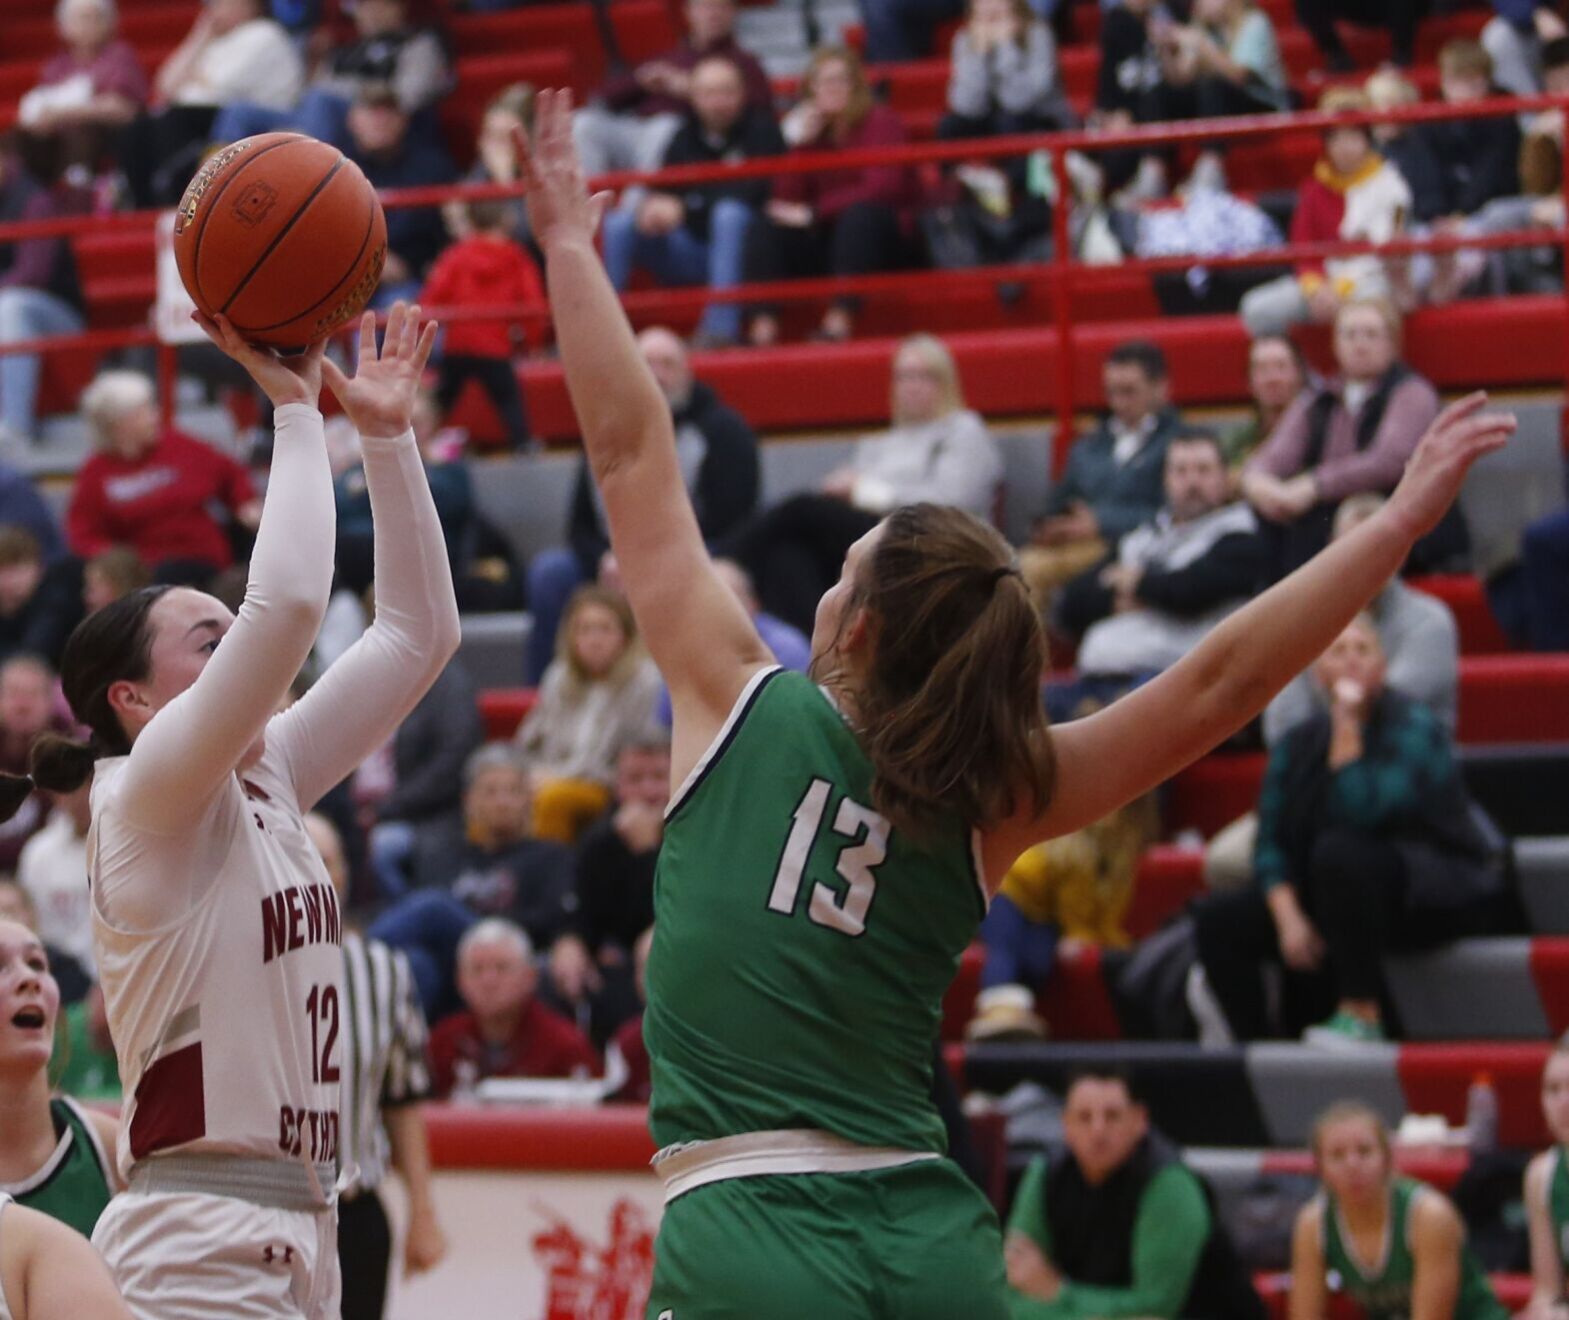 High School Basketball: Scores from Tuesday’s action in North Iowa